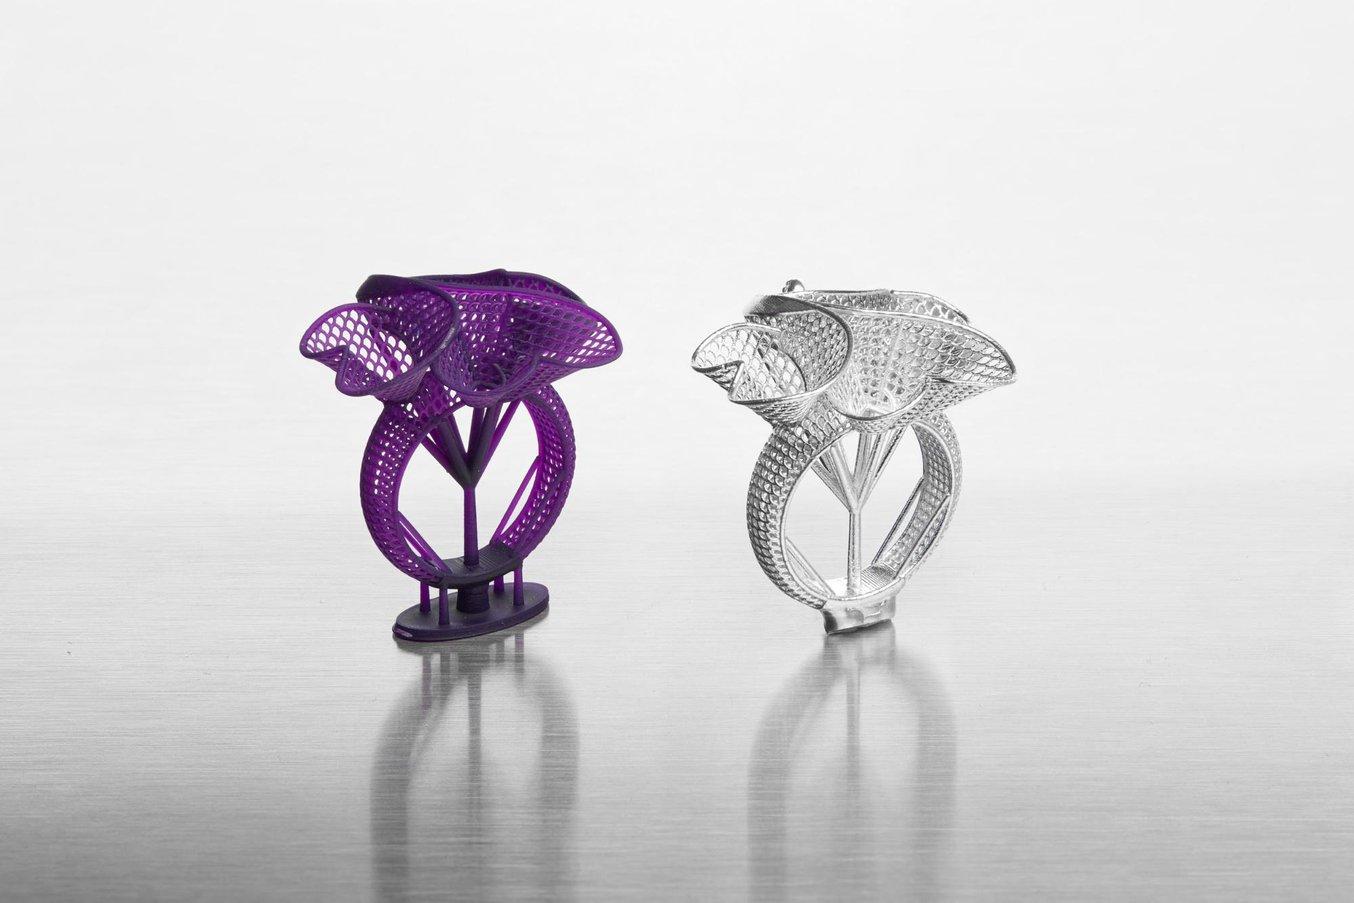 Castable Wax Resin 3D printed ring